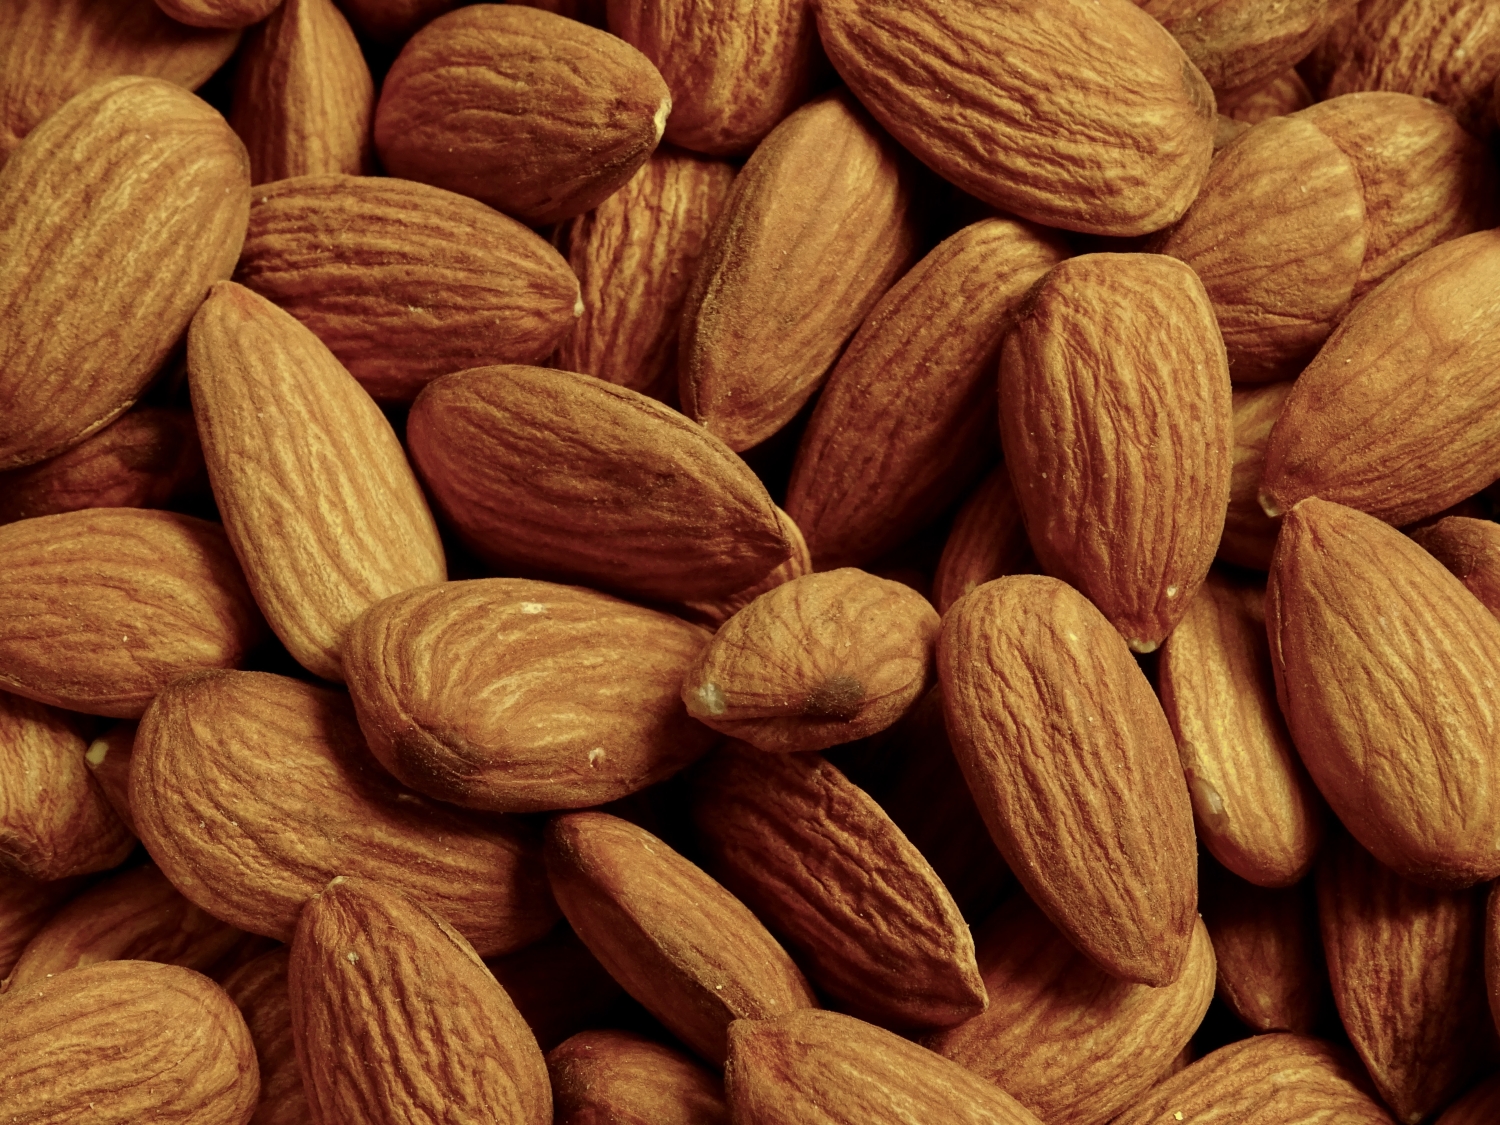 Zoom in on a load of almonds